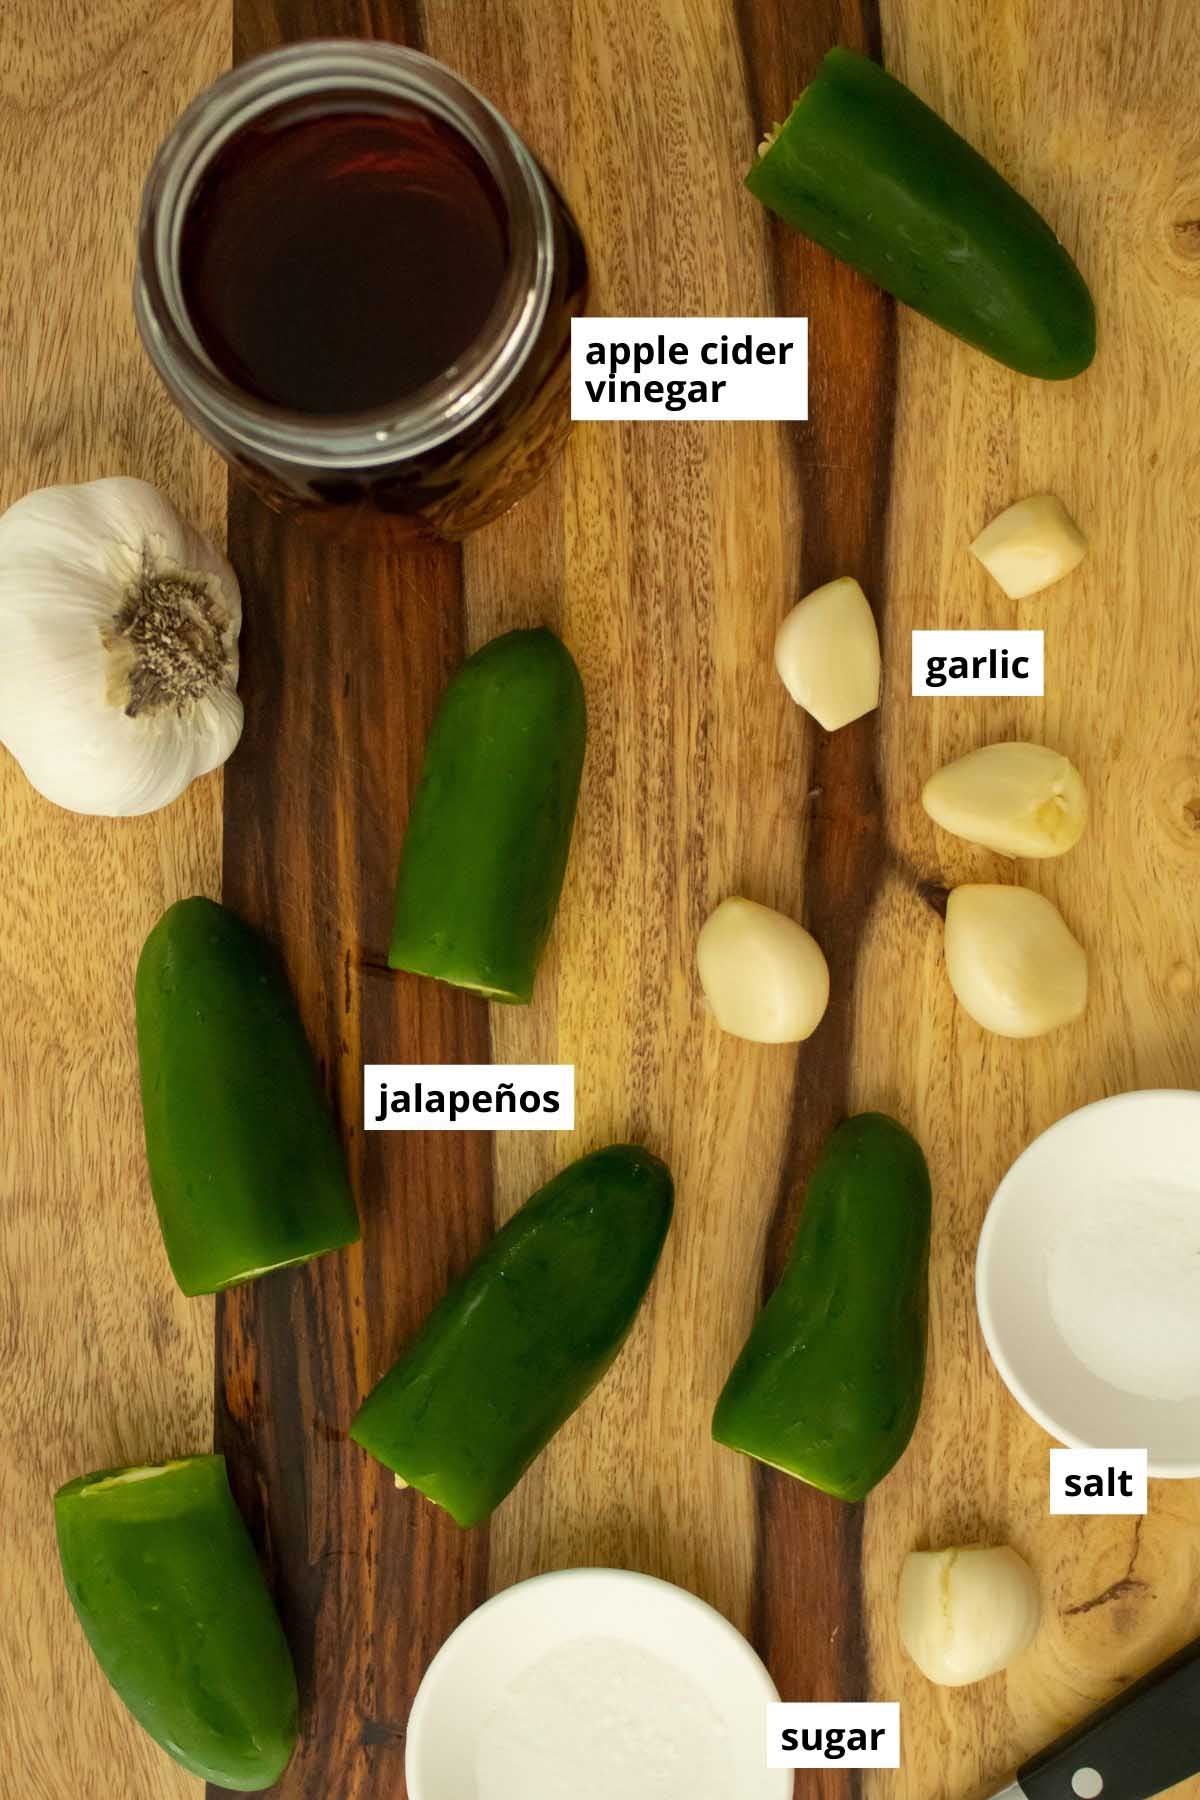 jalapeños, garlic, vinegar, salt, and sugar on a wooden cutting board with text labels on each